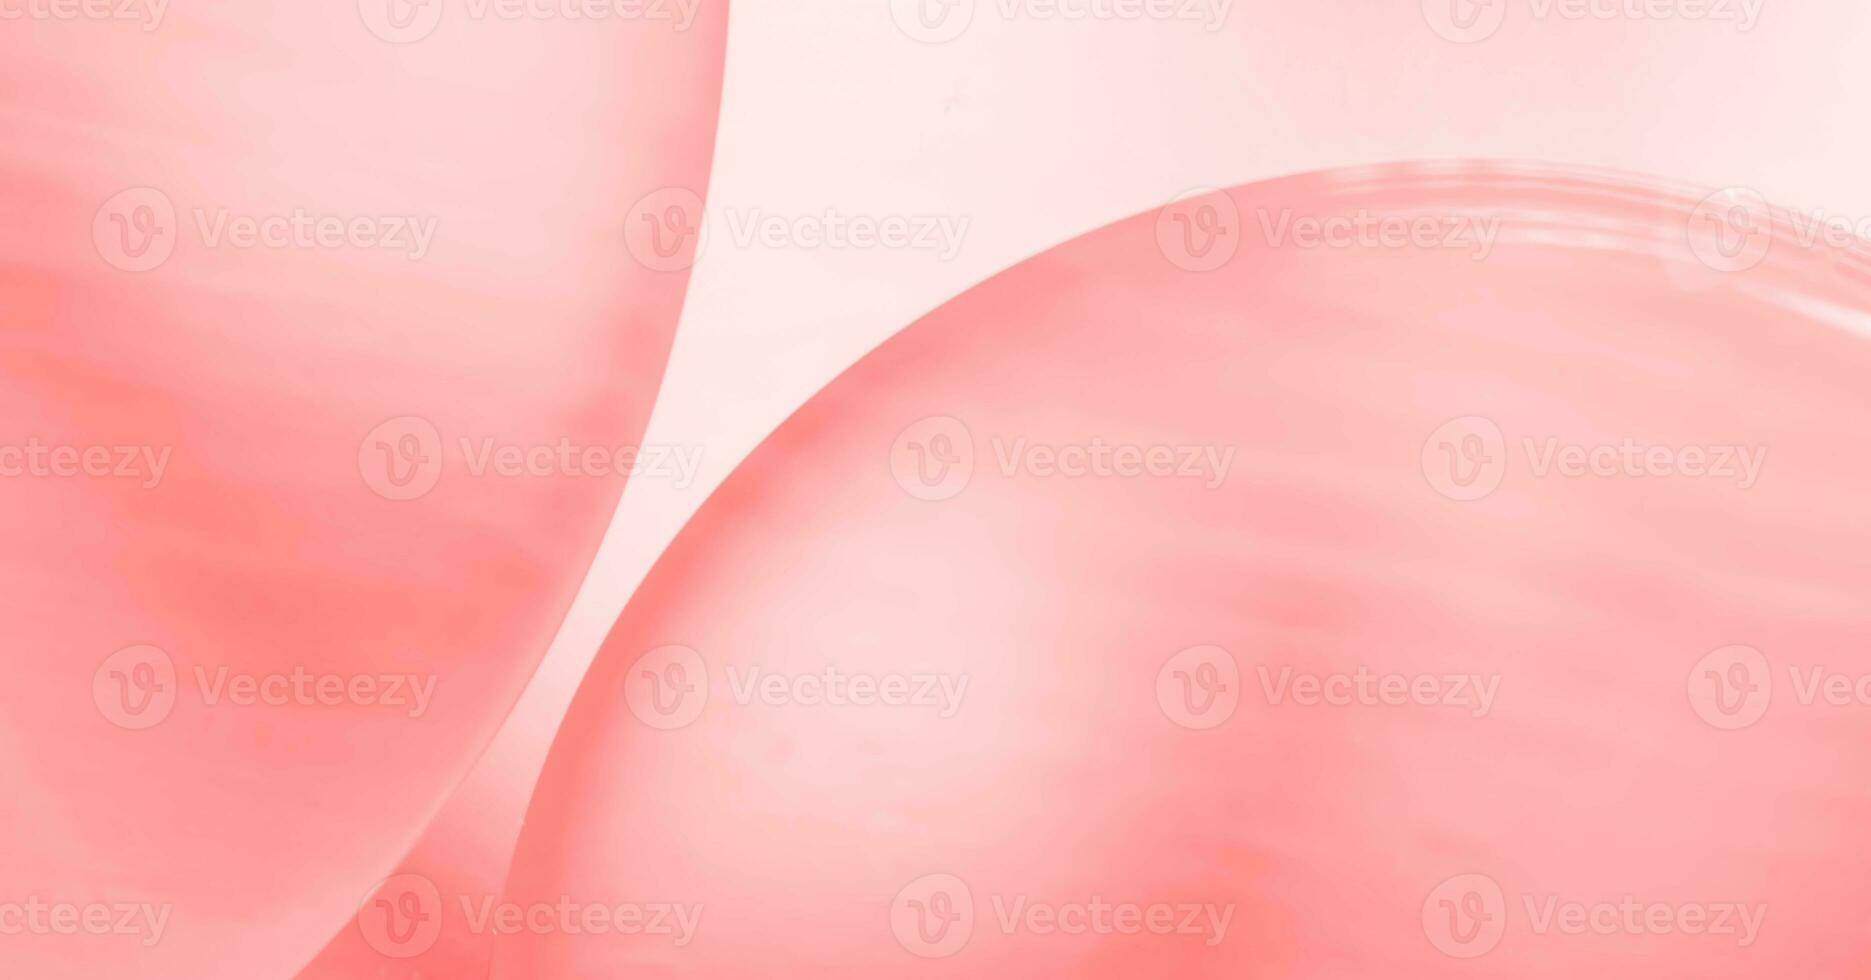 Abstract Bubbles Colorfully Blurred Canvas Background photo